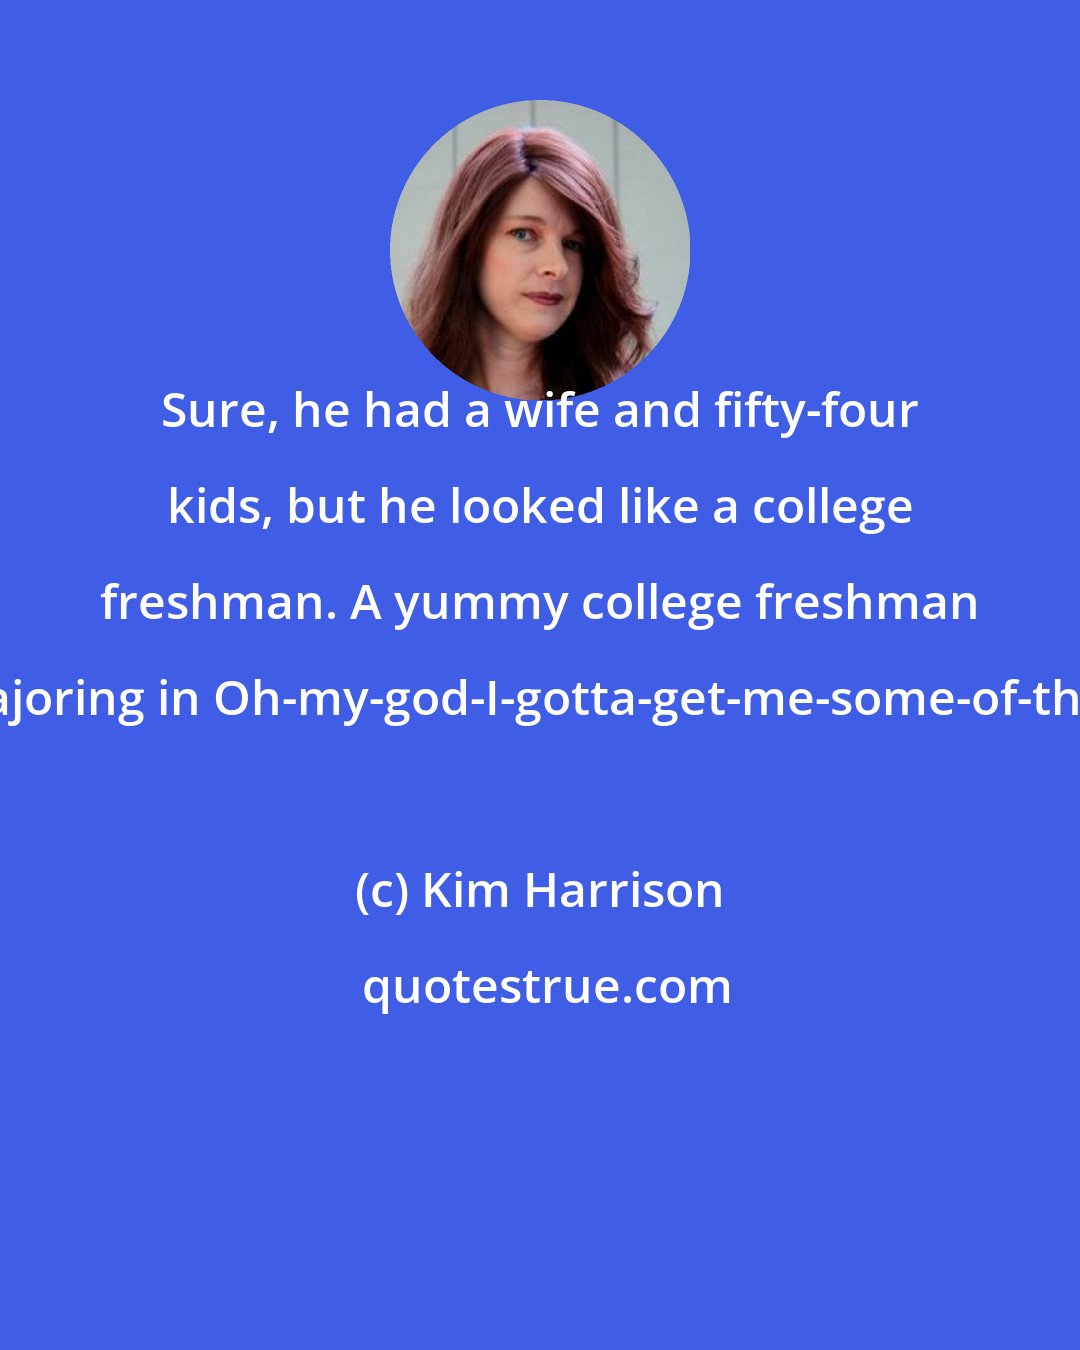 Kim Harrison: Sure, he had a wife and fifty-four kids, but he looked like a college freshman. A yummy college freshman majoring in Oh-my-god-I-gotta-get-me-some-of-that.